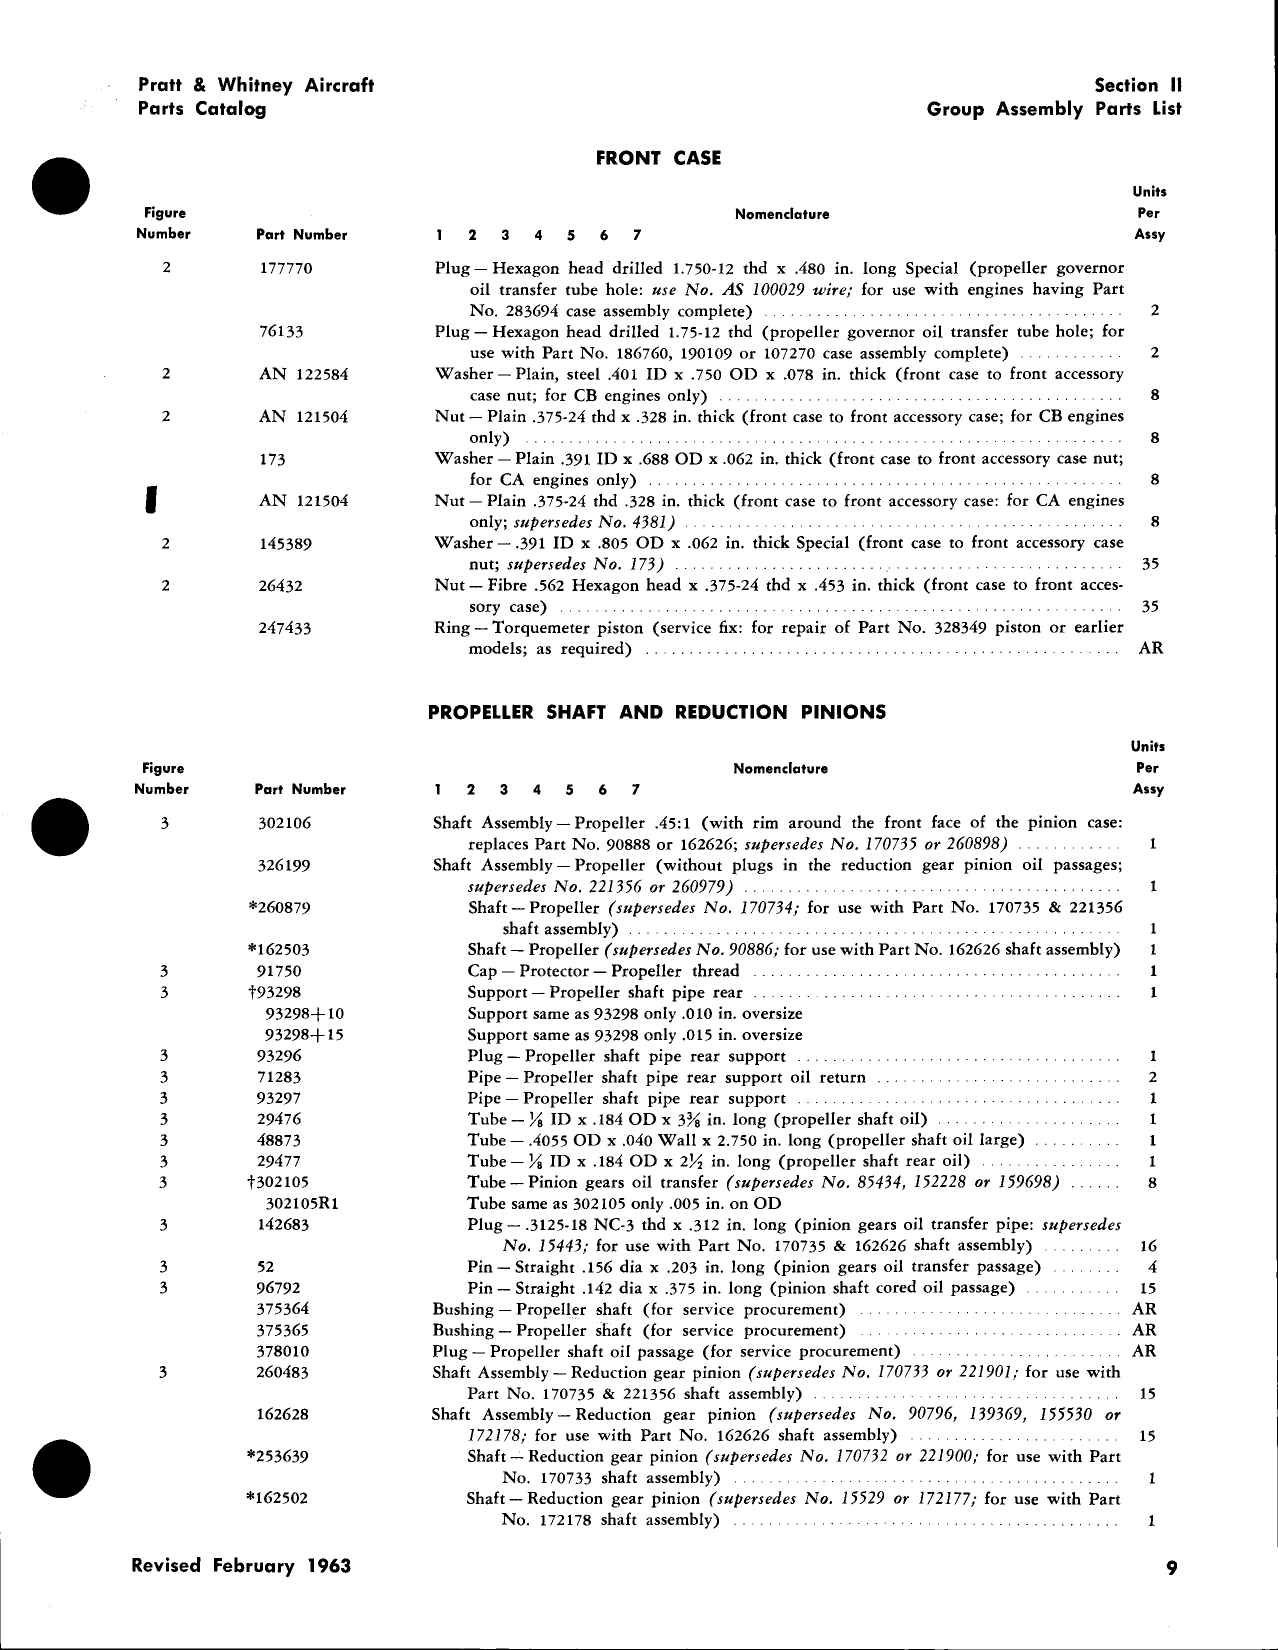 Sample page 12 from AirCorps Library document: R-2800 Double Wasp Parts Catalog